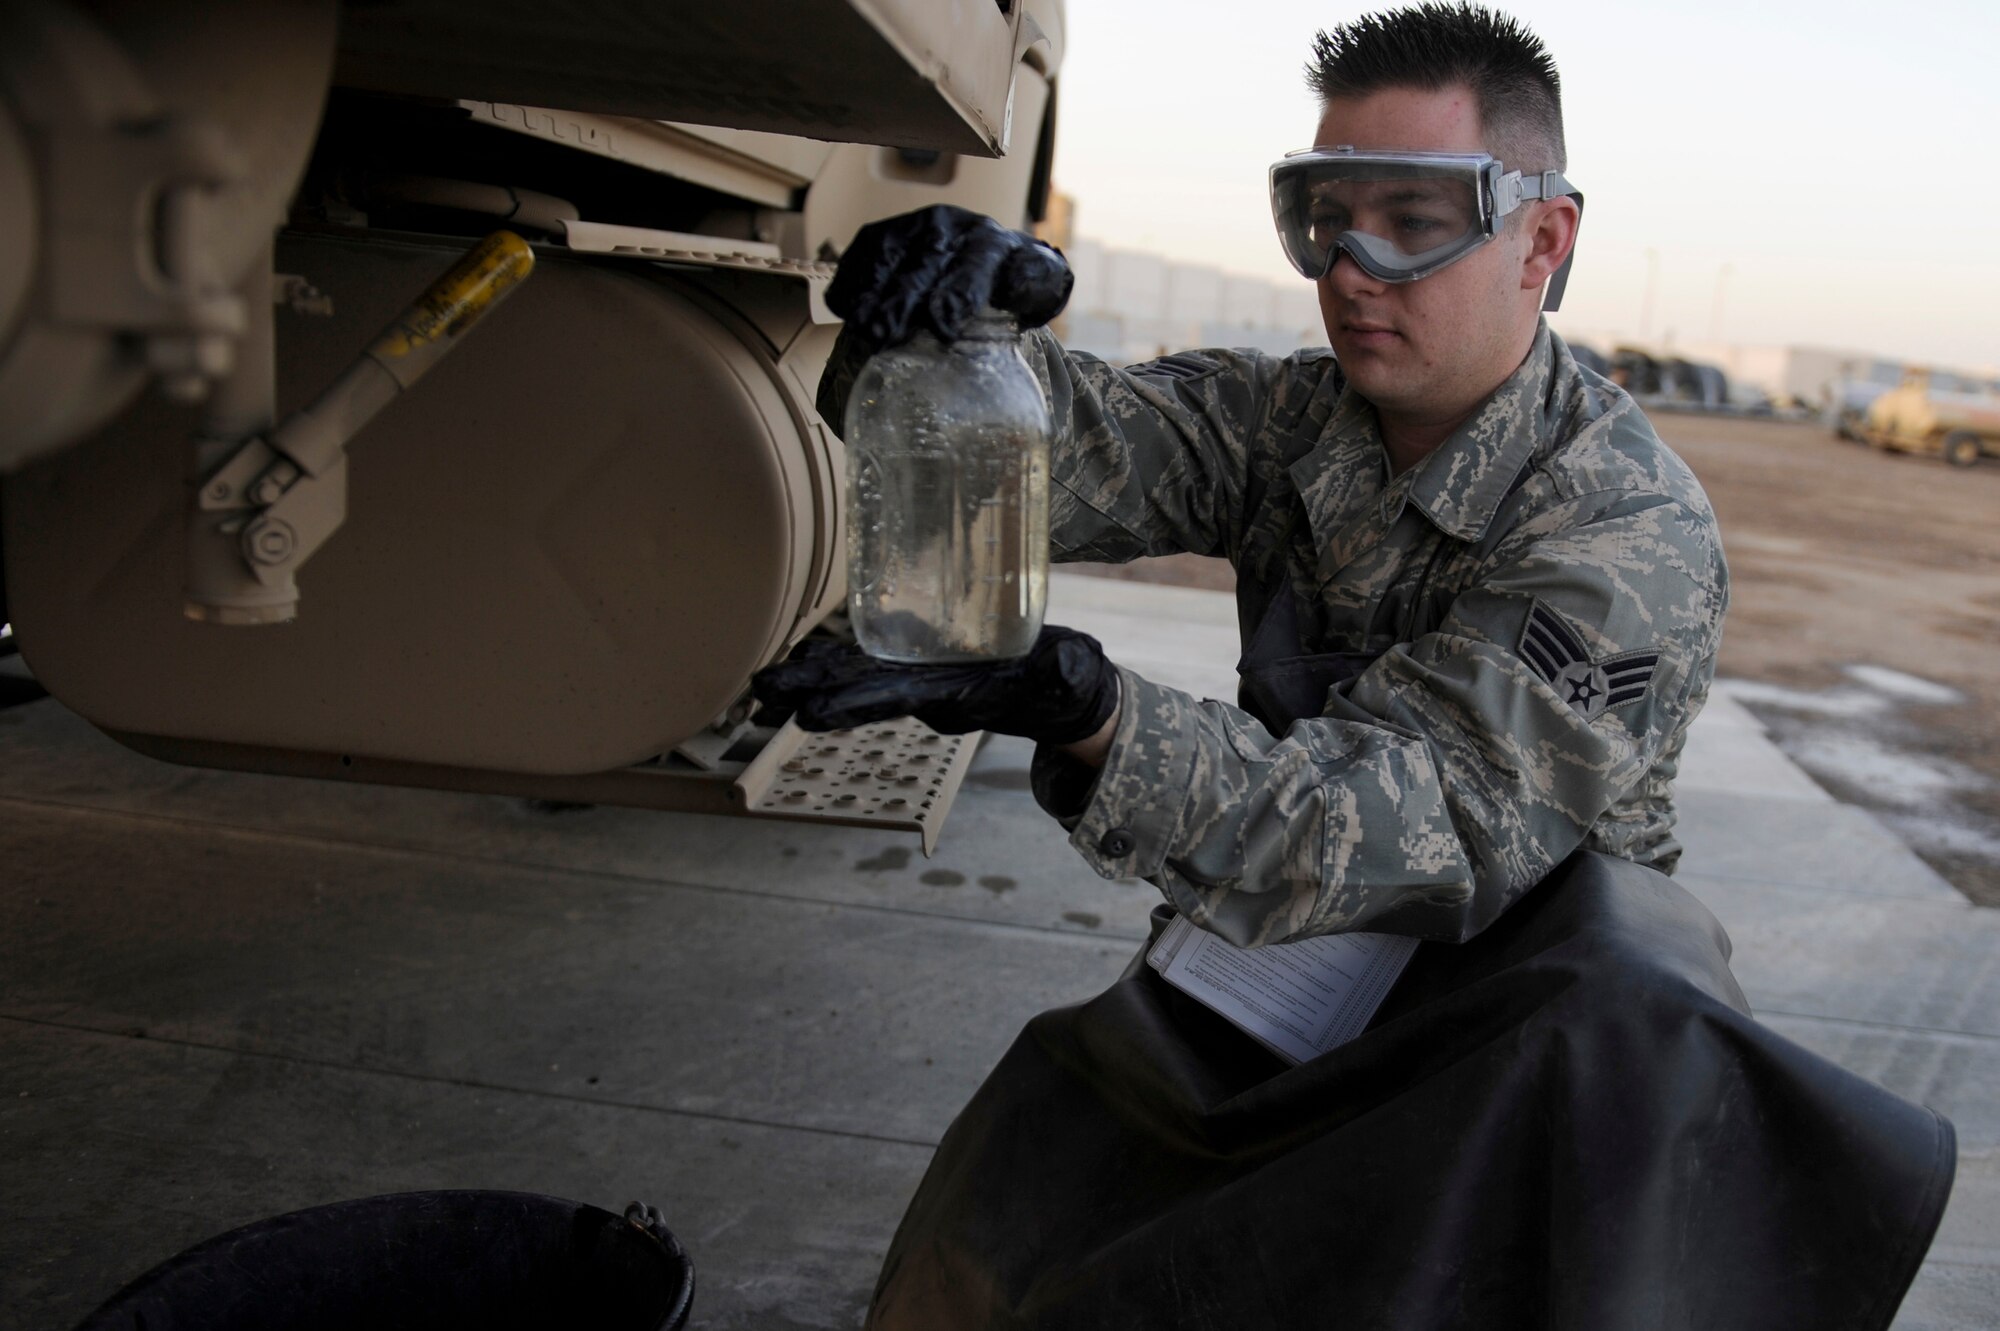 Senior Airman Brian Amos, 380th Expeditionary Logistics Readiness Squadron, fuels flight, performs a visual analysis on a quart sample of fuel taken from an R-11 fuel truck during a fuel checkpoint operation, April 4 at an undisclosed location in Southwest Asia. Airman Amos is deployed from Nellis AFB, Nev. and hails from Las Vegas, Nev. (U.S. Air Force photo by Senior Airman Brian J. Ellis) (Released)